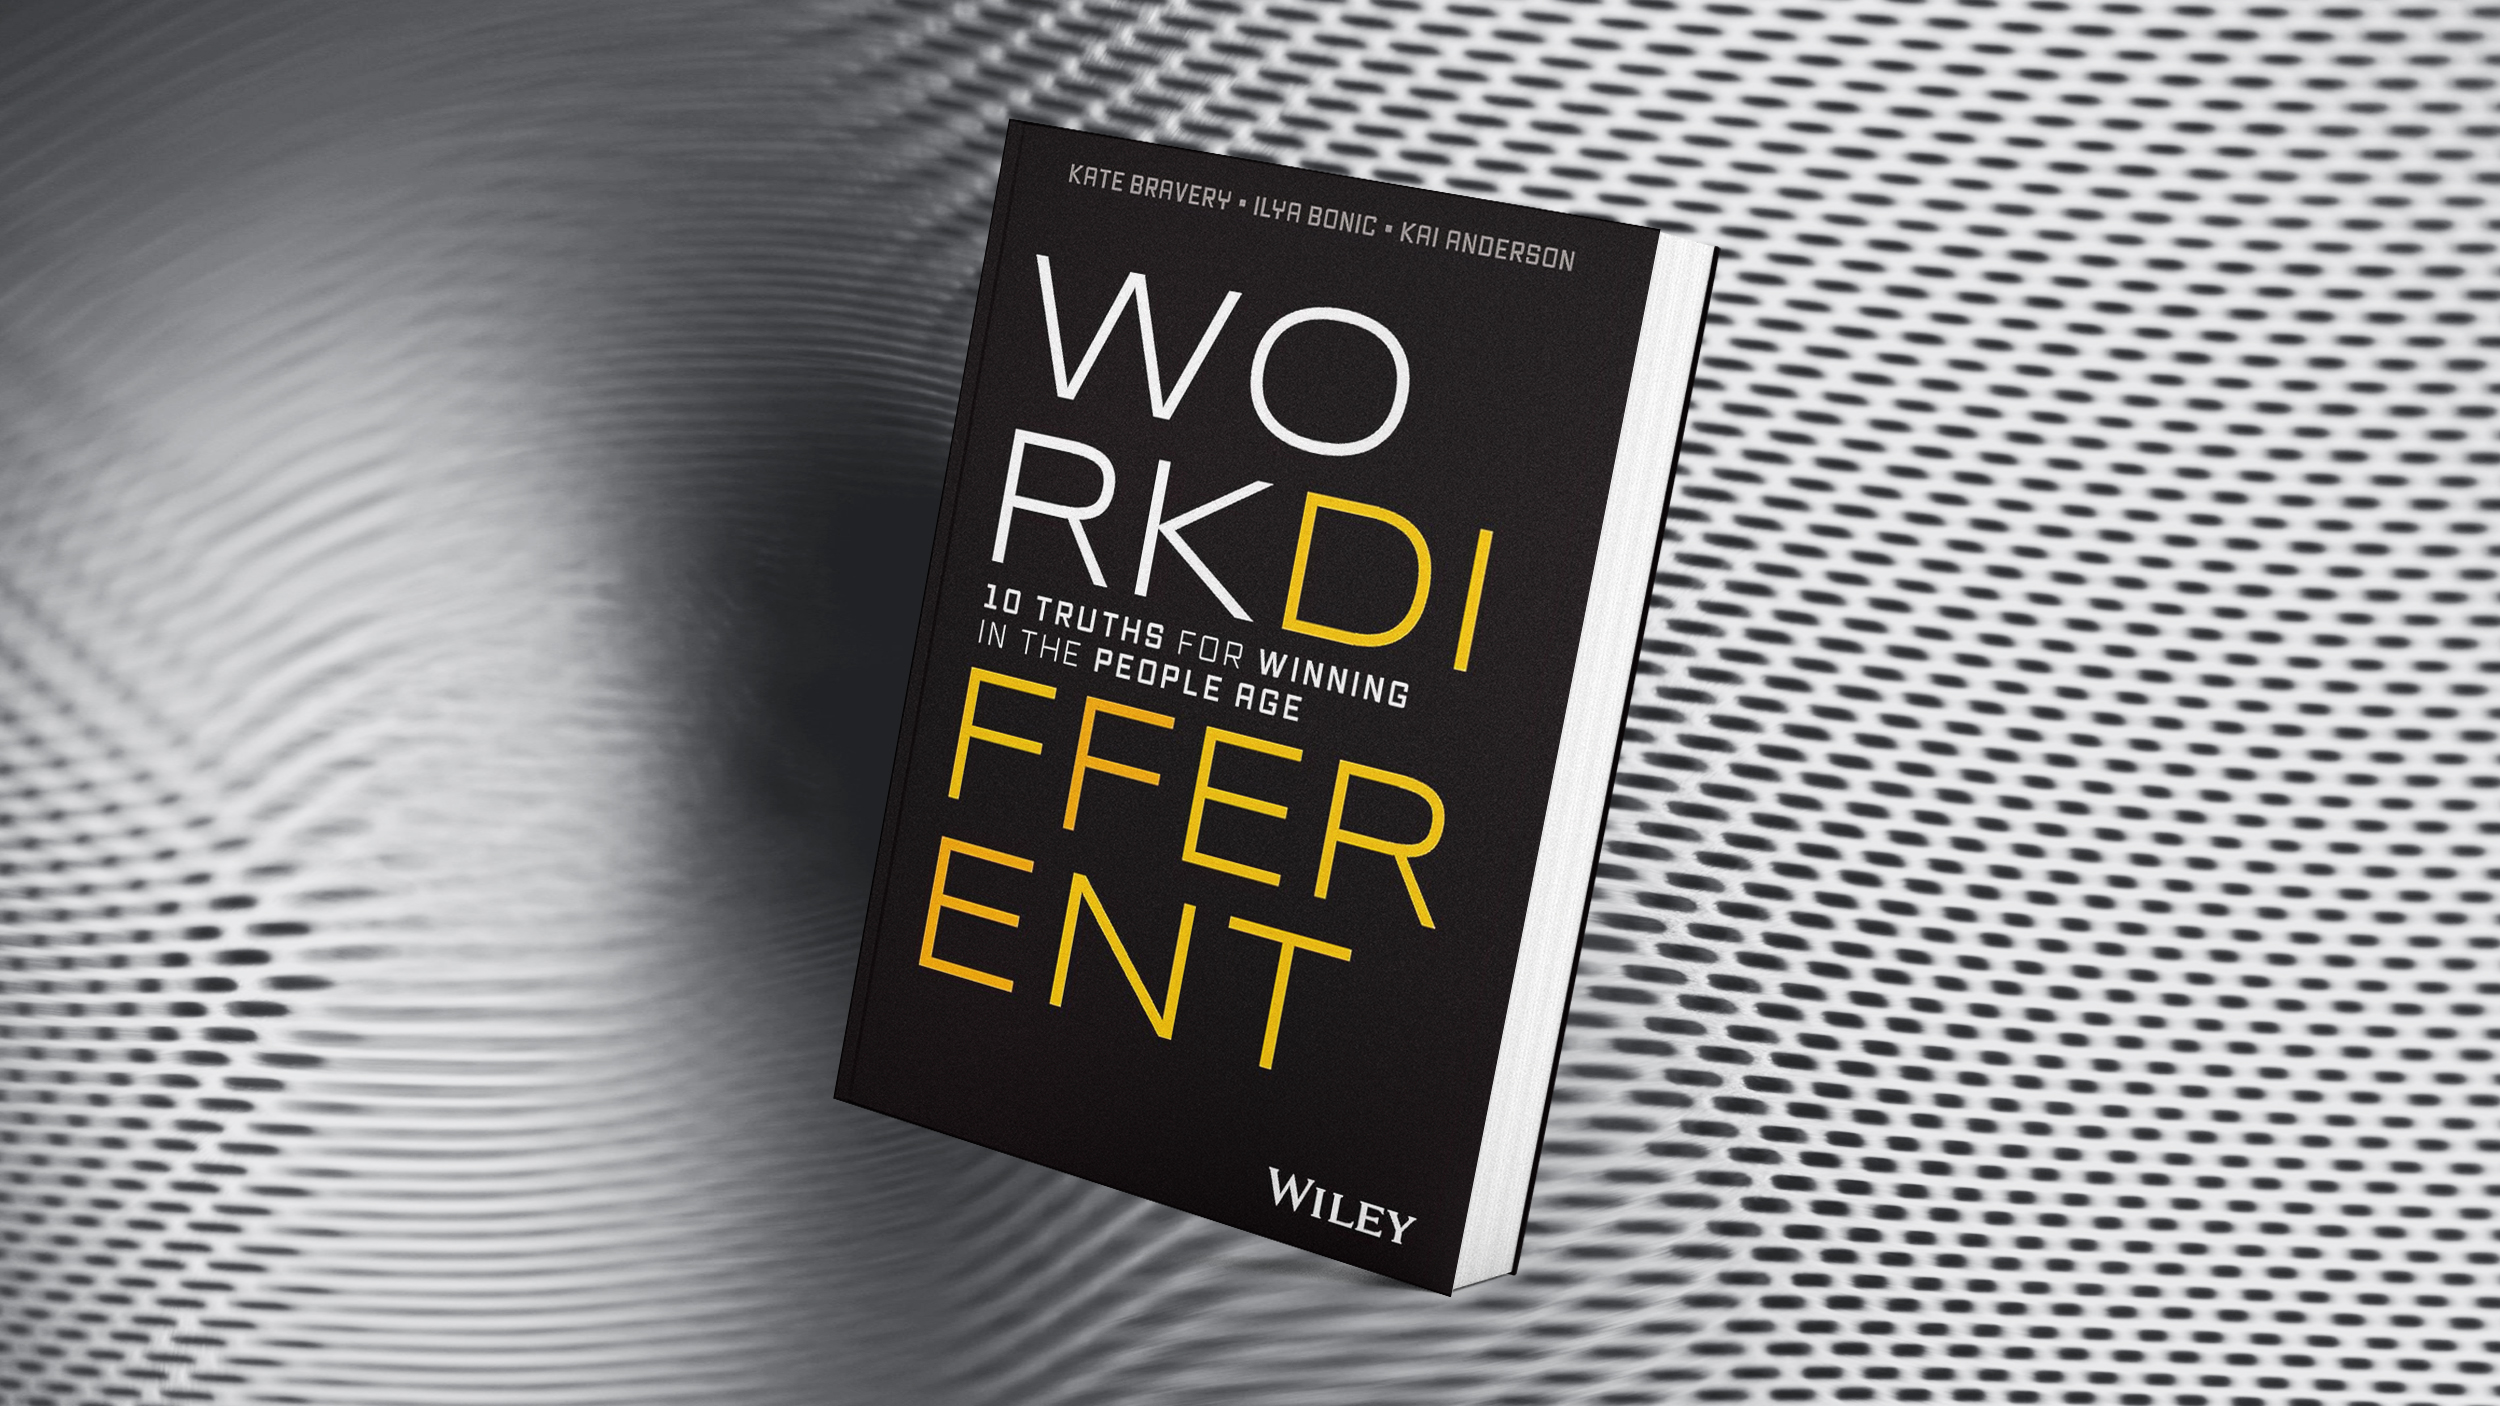 A book cover featuring the words "work ddi" and an intelligence equalizer symbol.